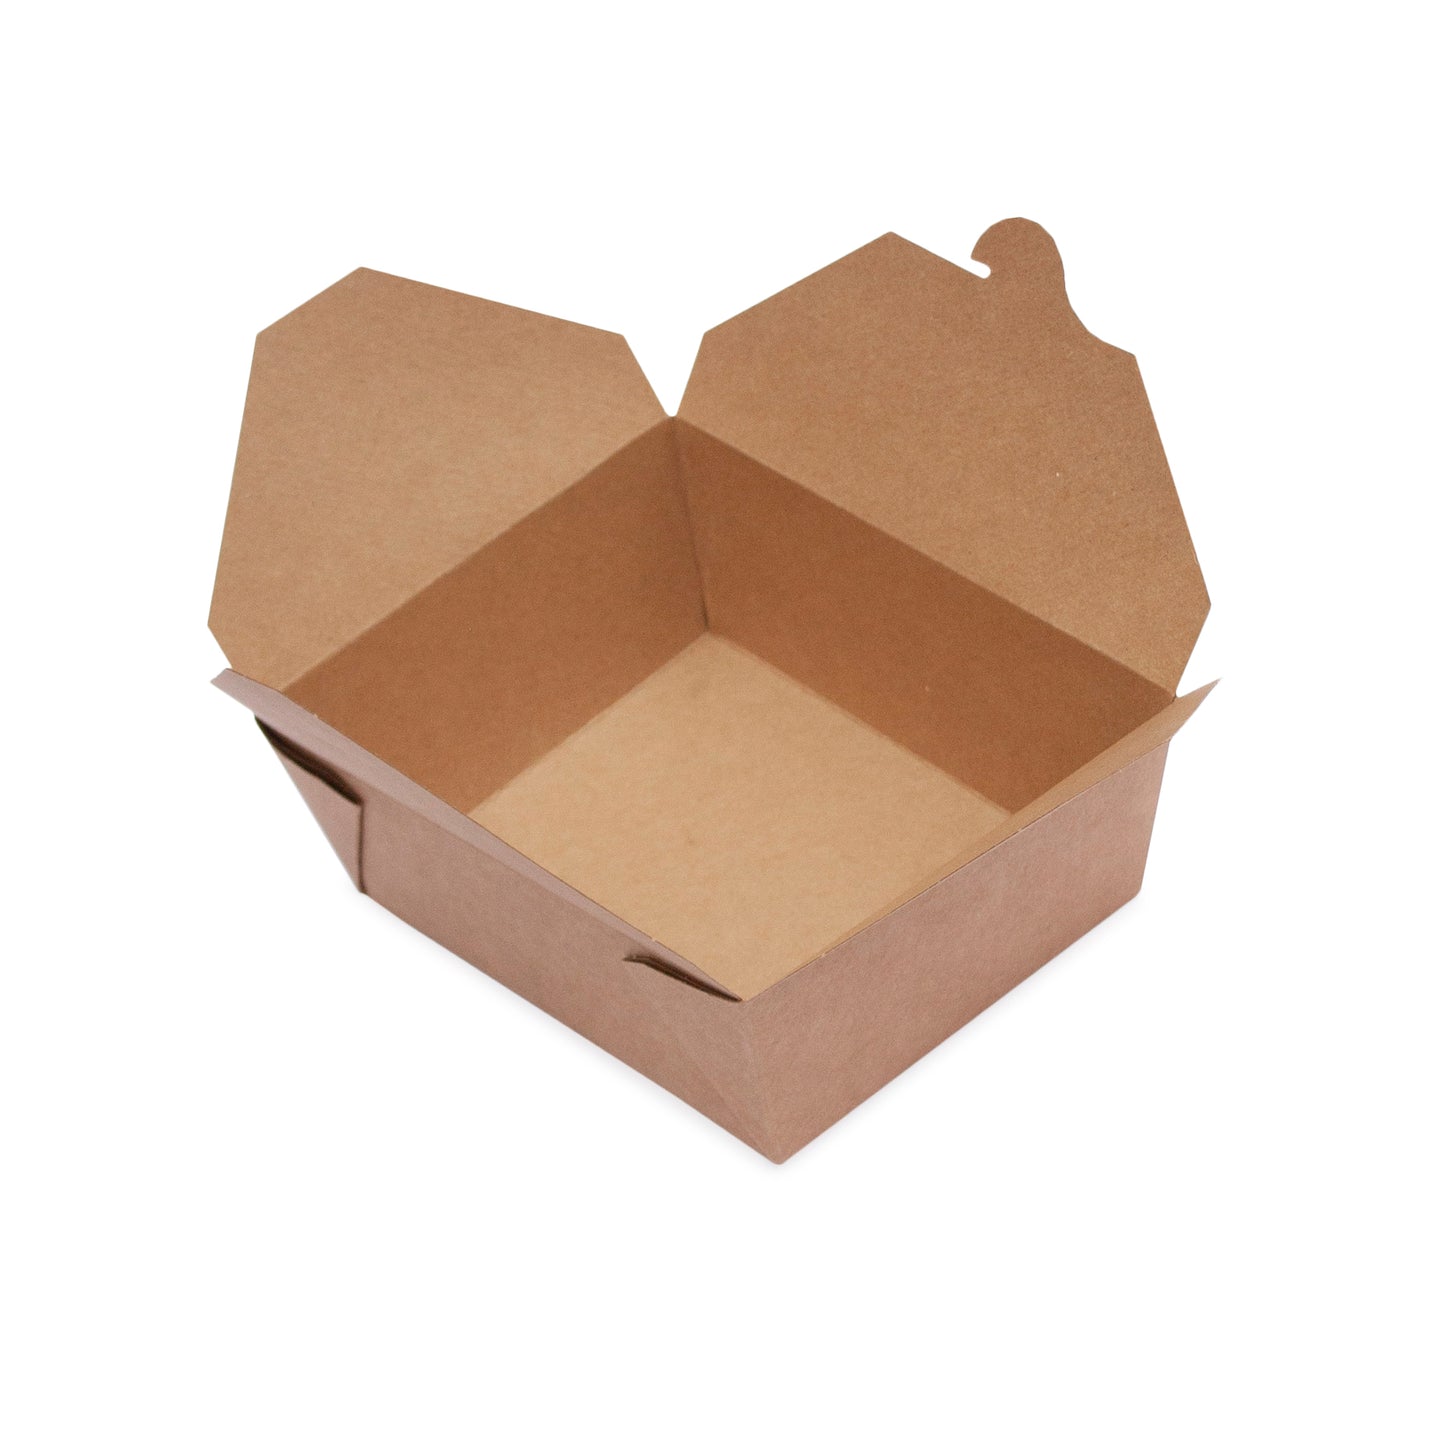 Leakproof food container No.2 kraft food-to-go carton 280 units, 1500ml (19.5 x 14 x 5cm)